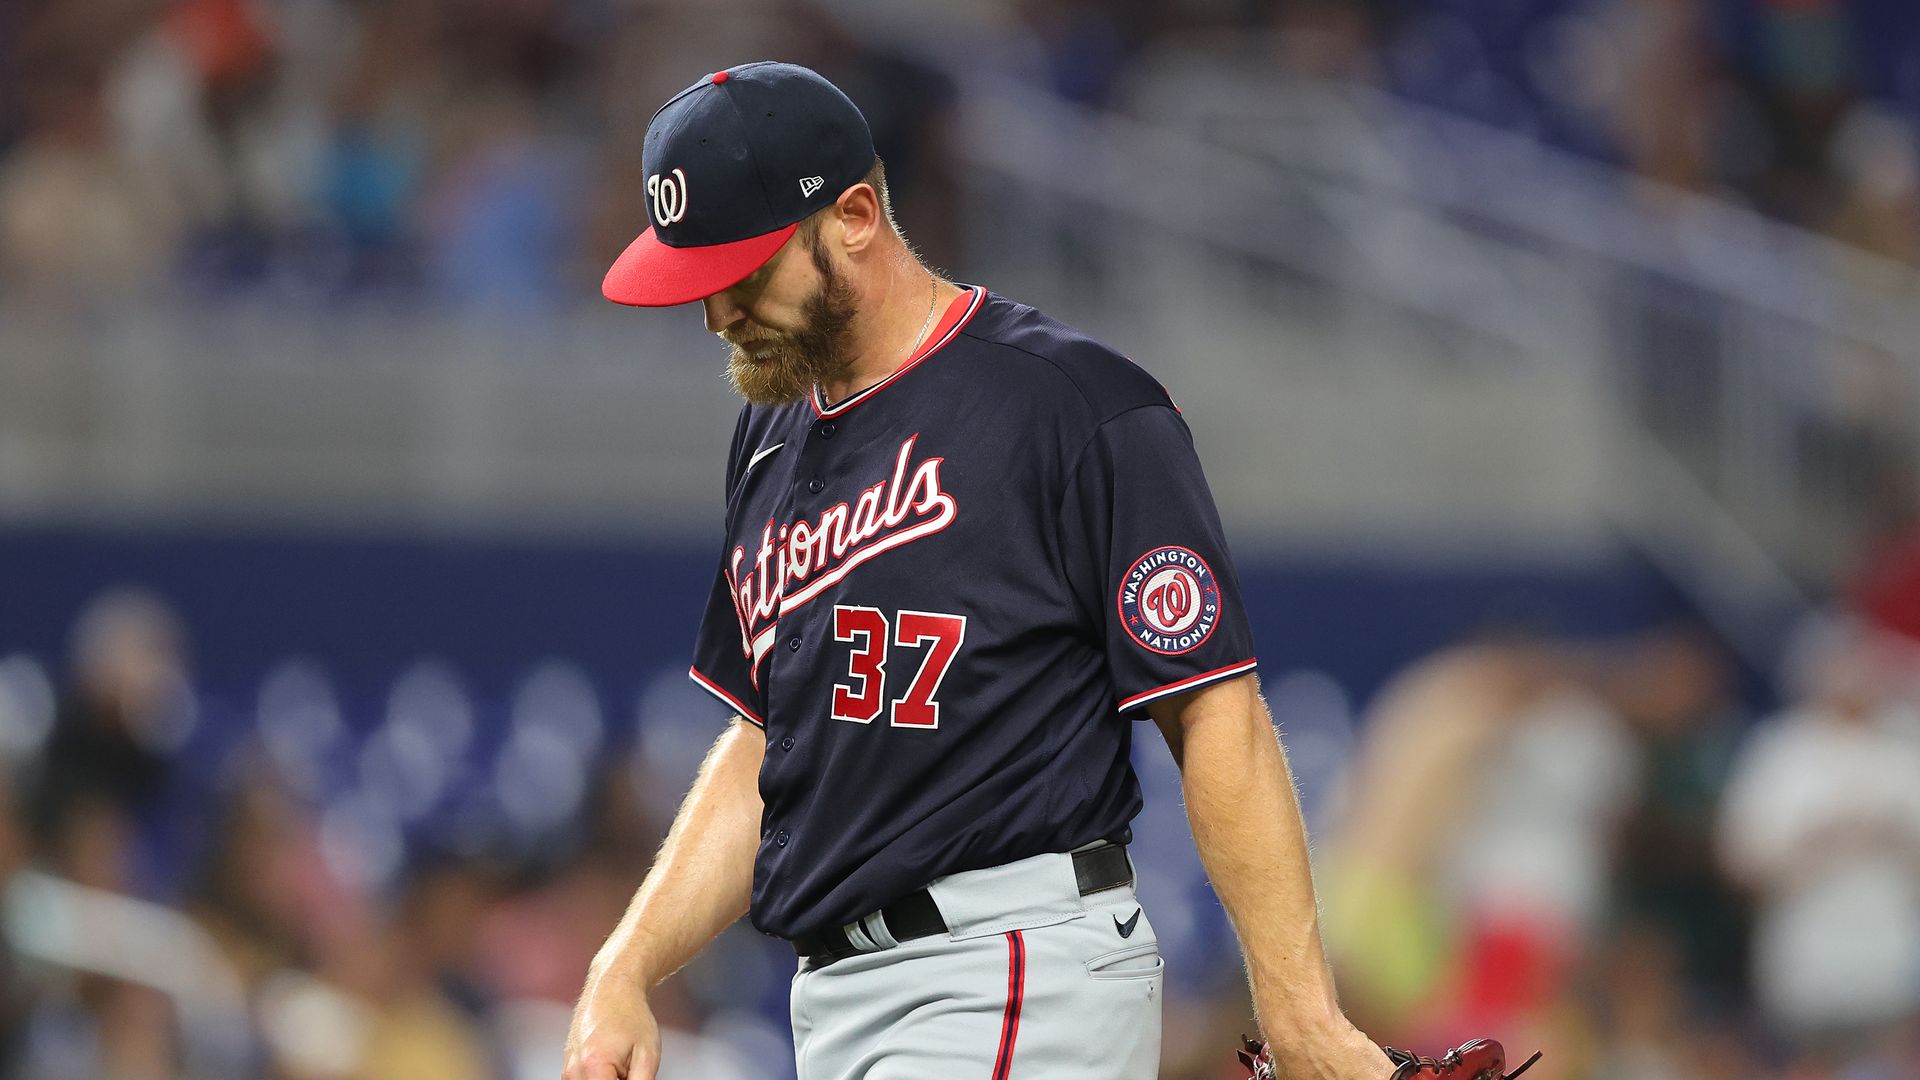 Strasburg's latest setback compounds Nationals' woes